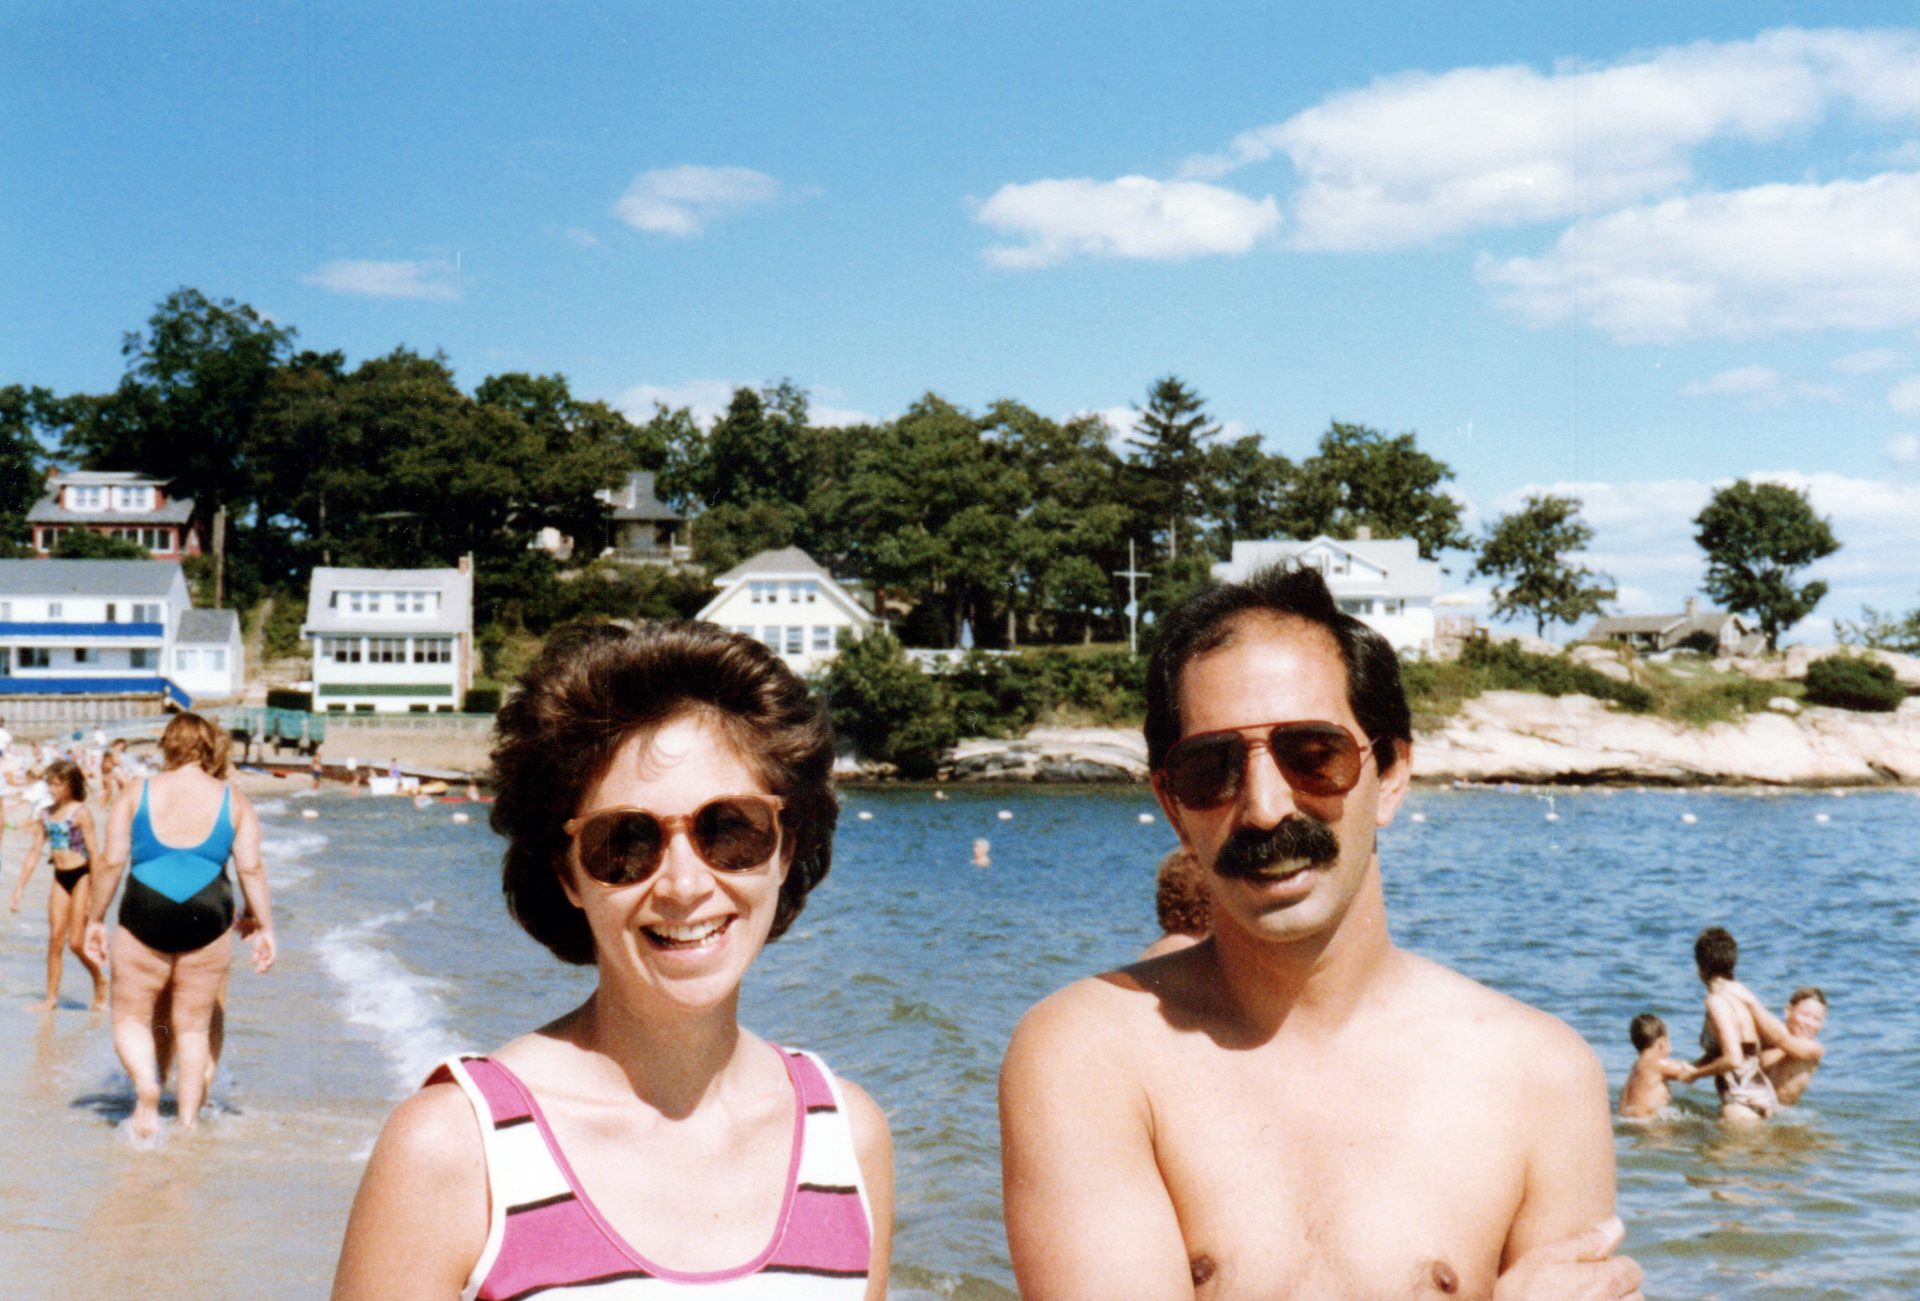 Angie and Jimmy at Point O' Woods Beach, Old Lyme, CT